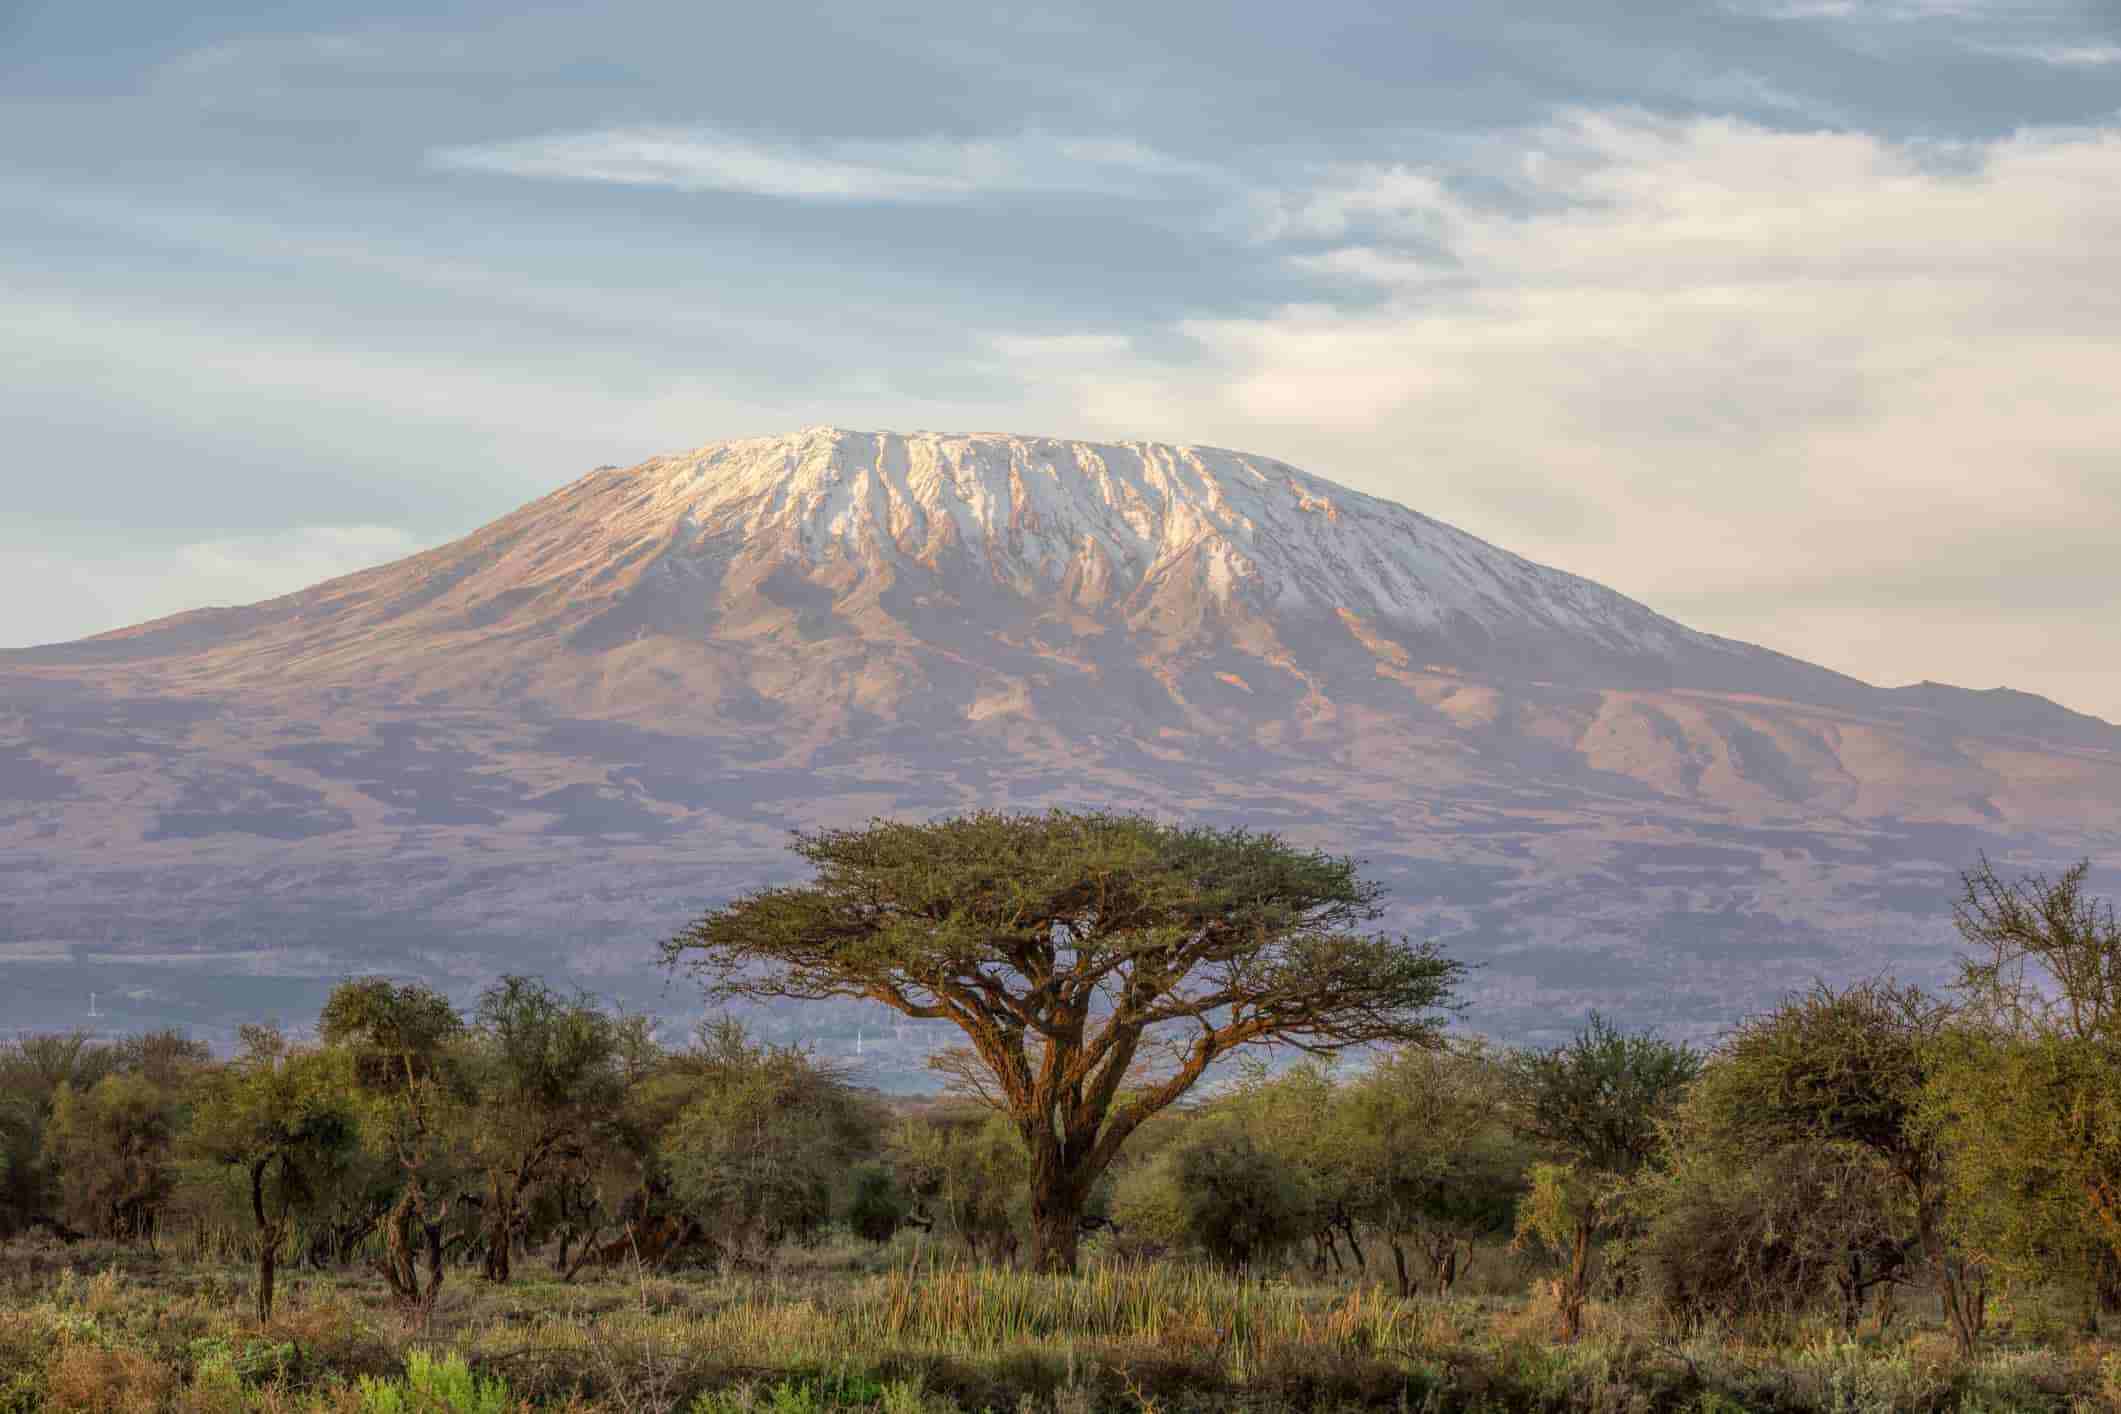 A large tree with a thick trunk and green leaves stands in front of a snow-capped mountain Kilimanjaro